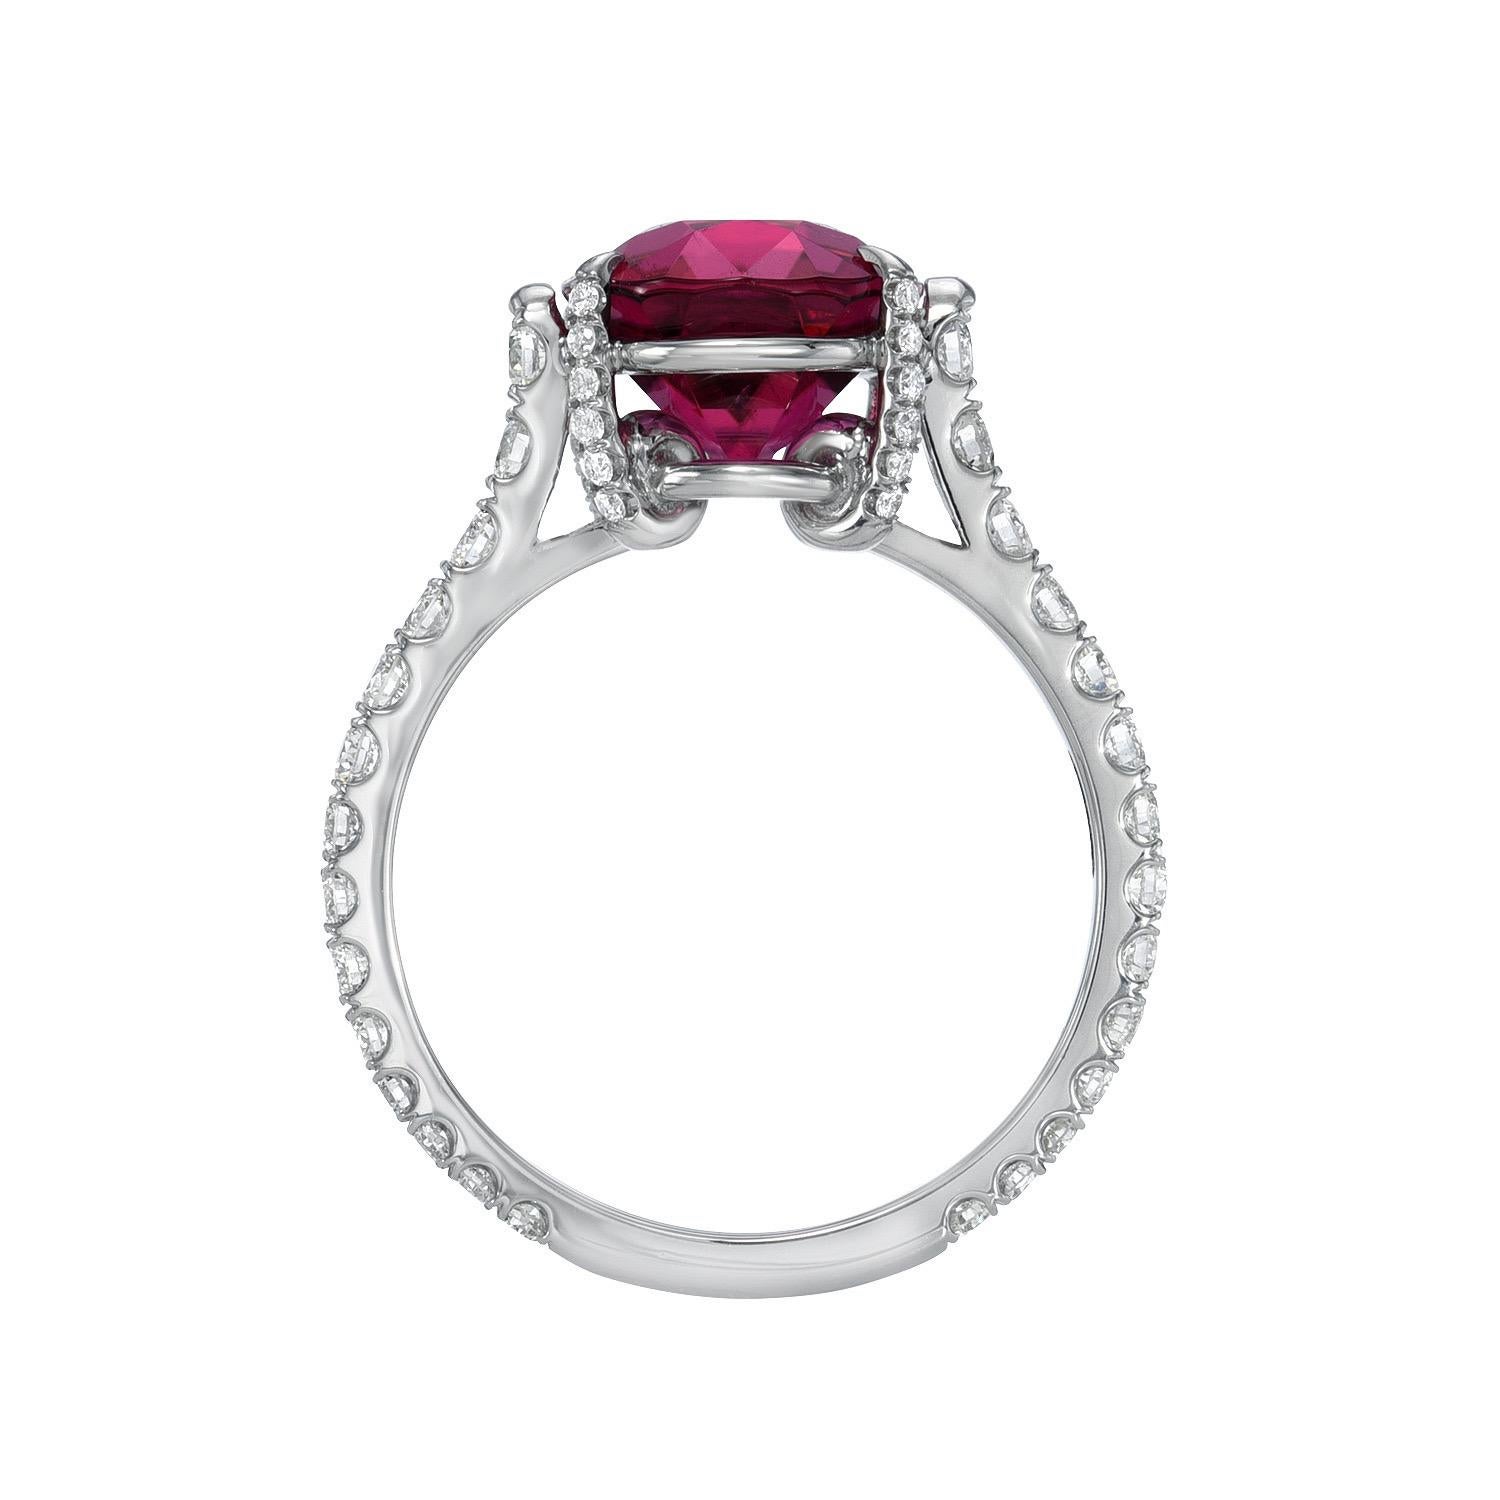 Women's Rubellite Tourmaline Ring 3.92 Carat Oval For Sale